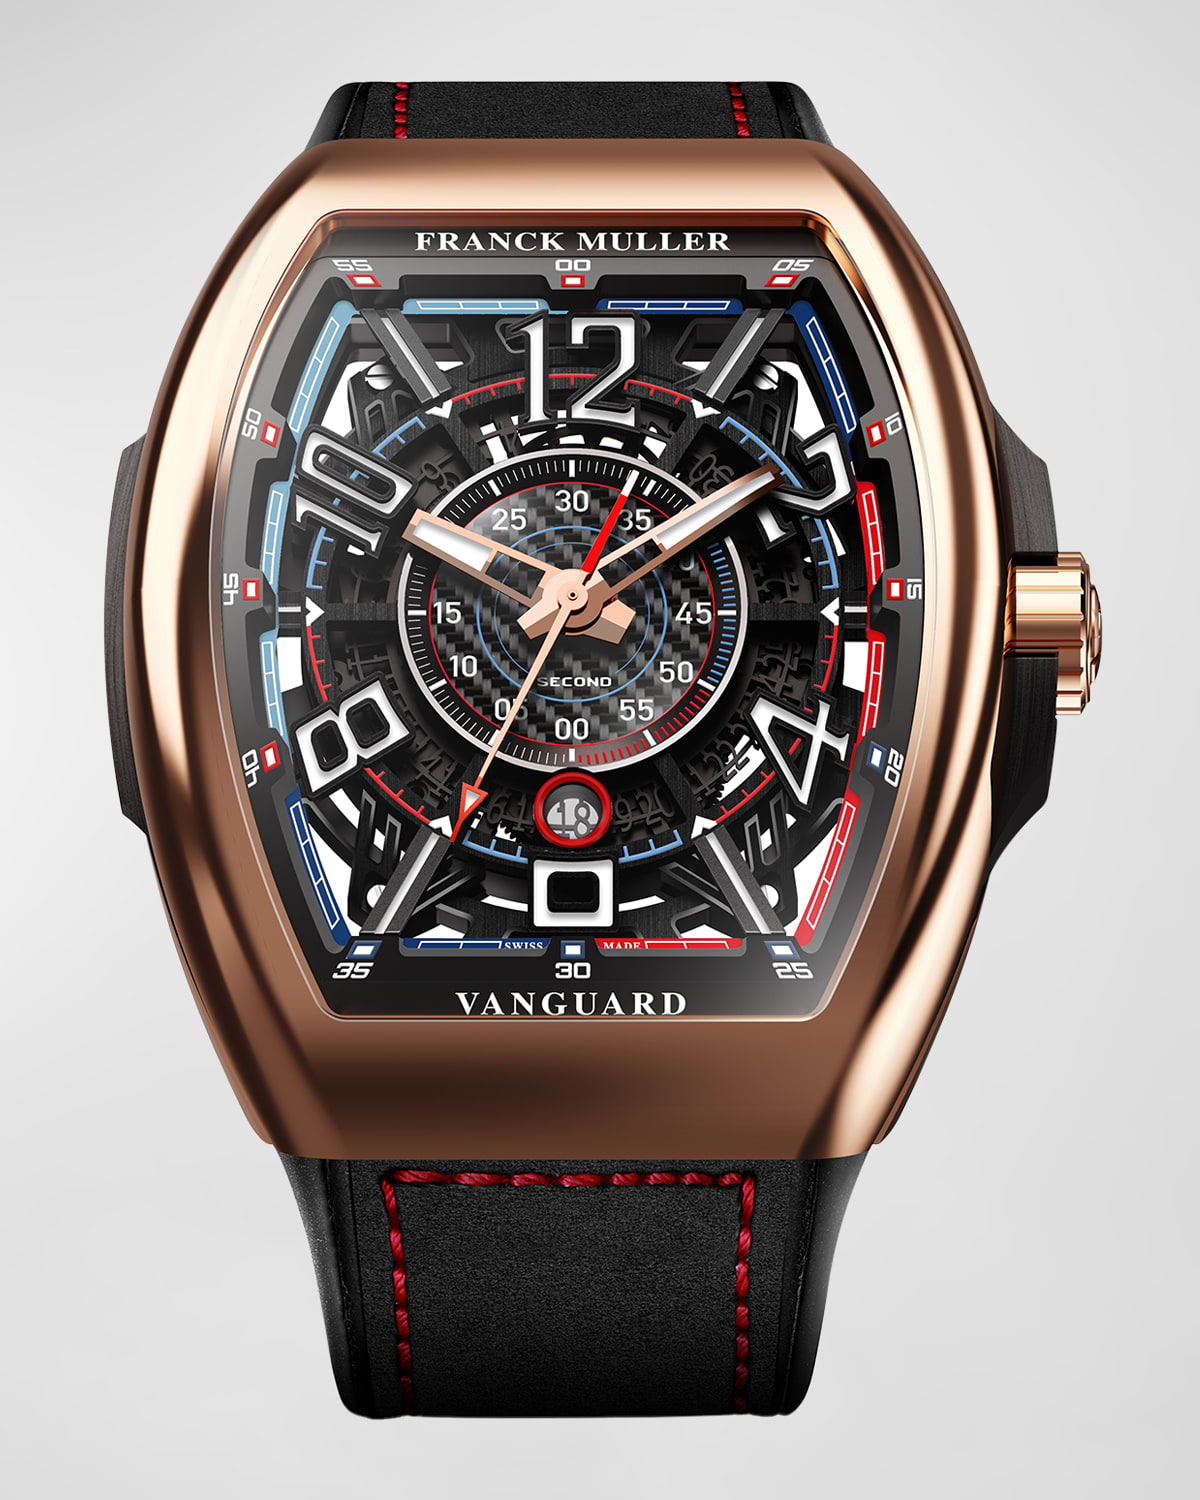 Franck Muller Limited Edition Rose Gold Auberlen Skeleton Auto Watch with Leather Strap